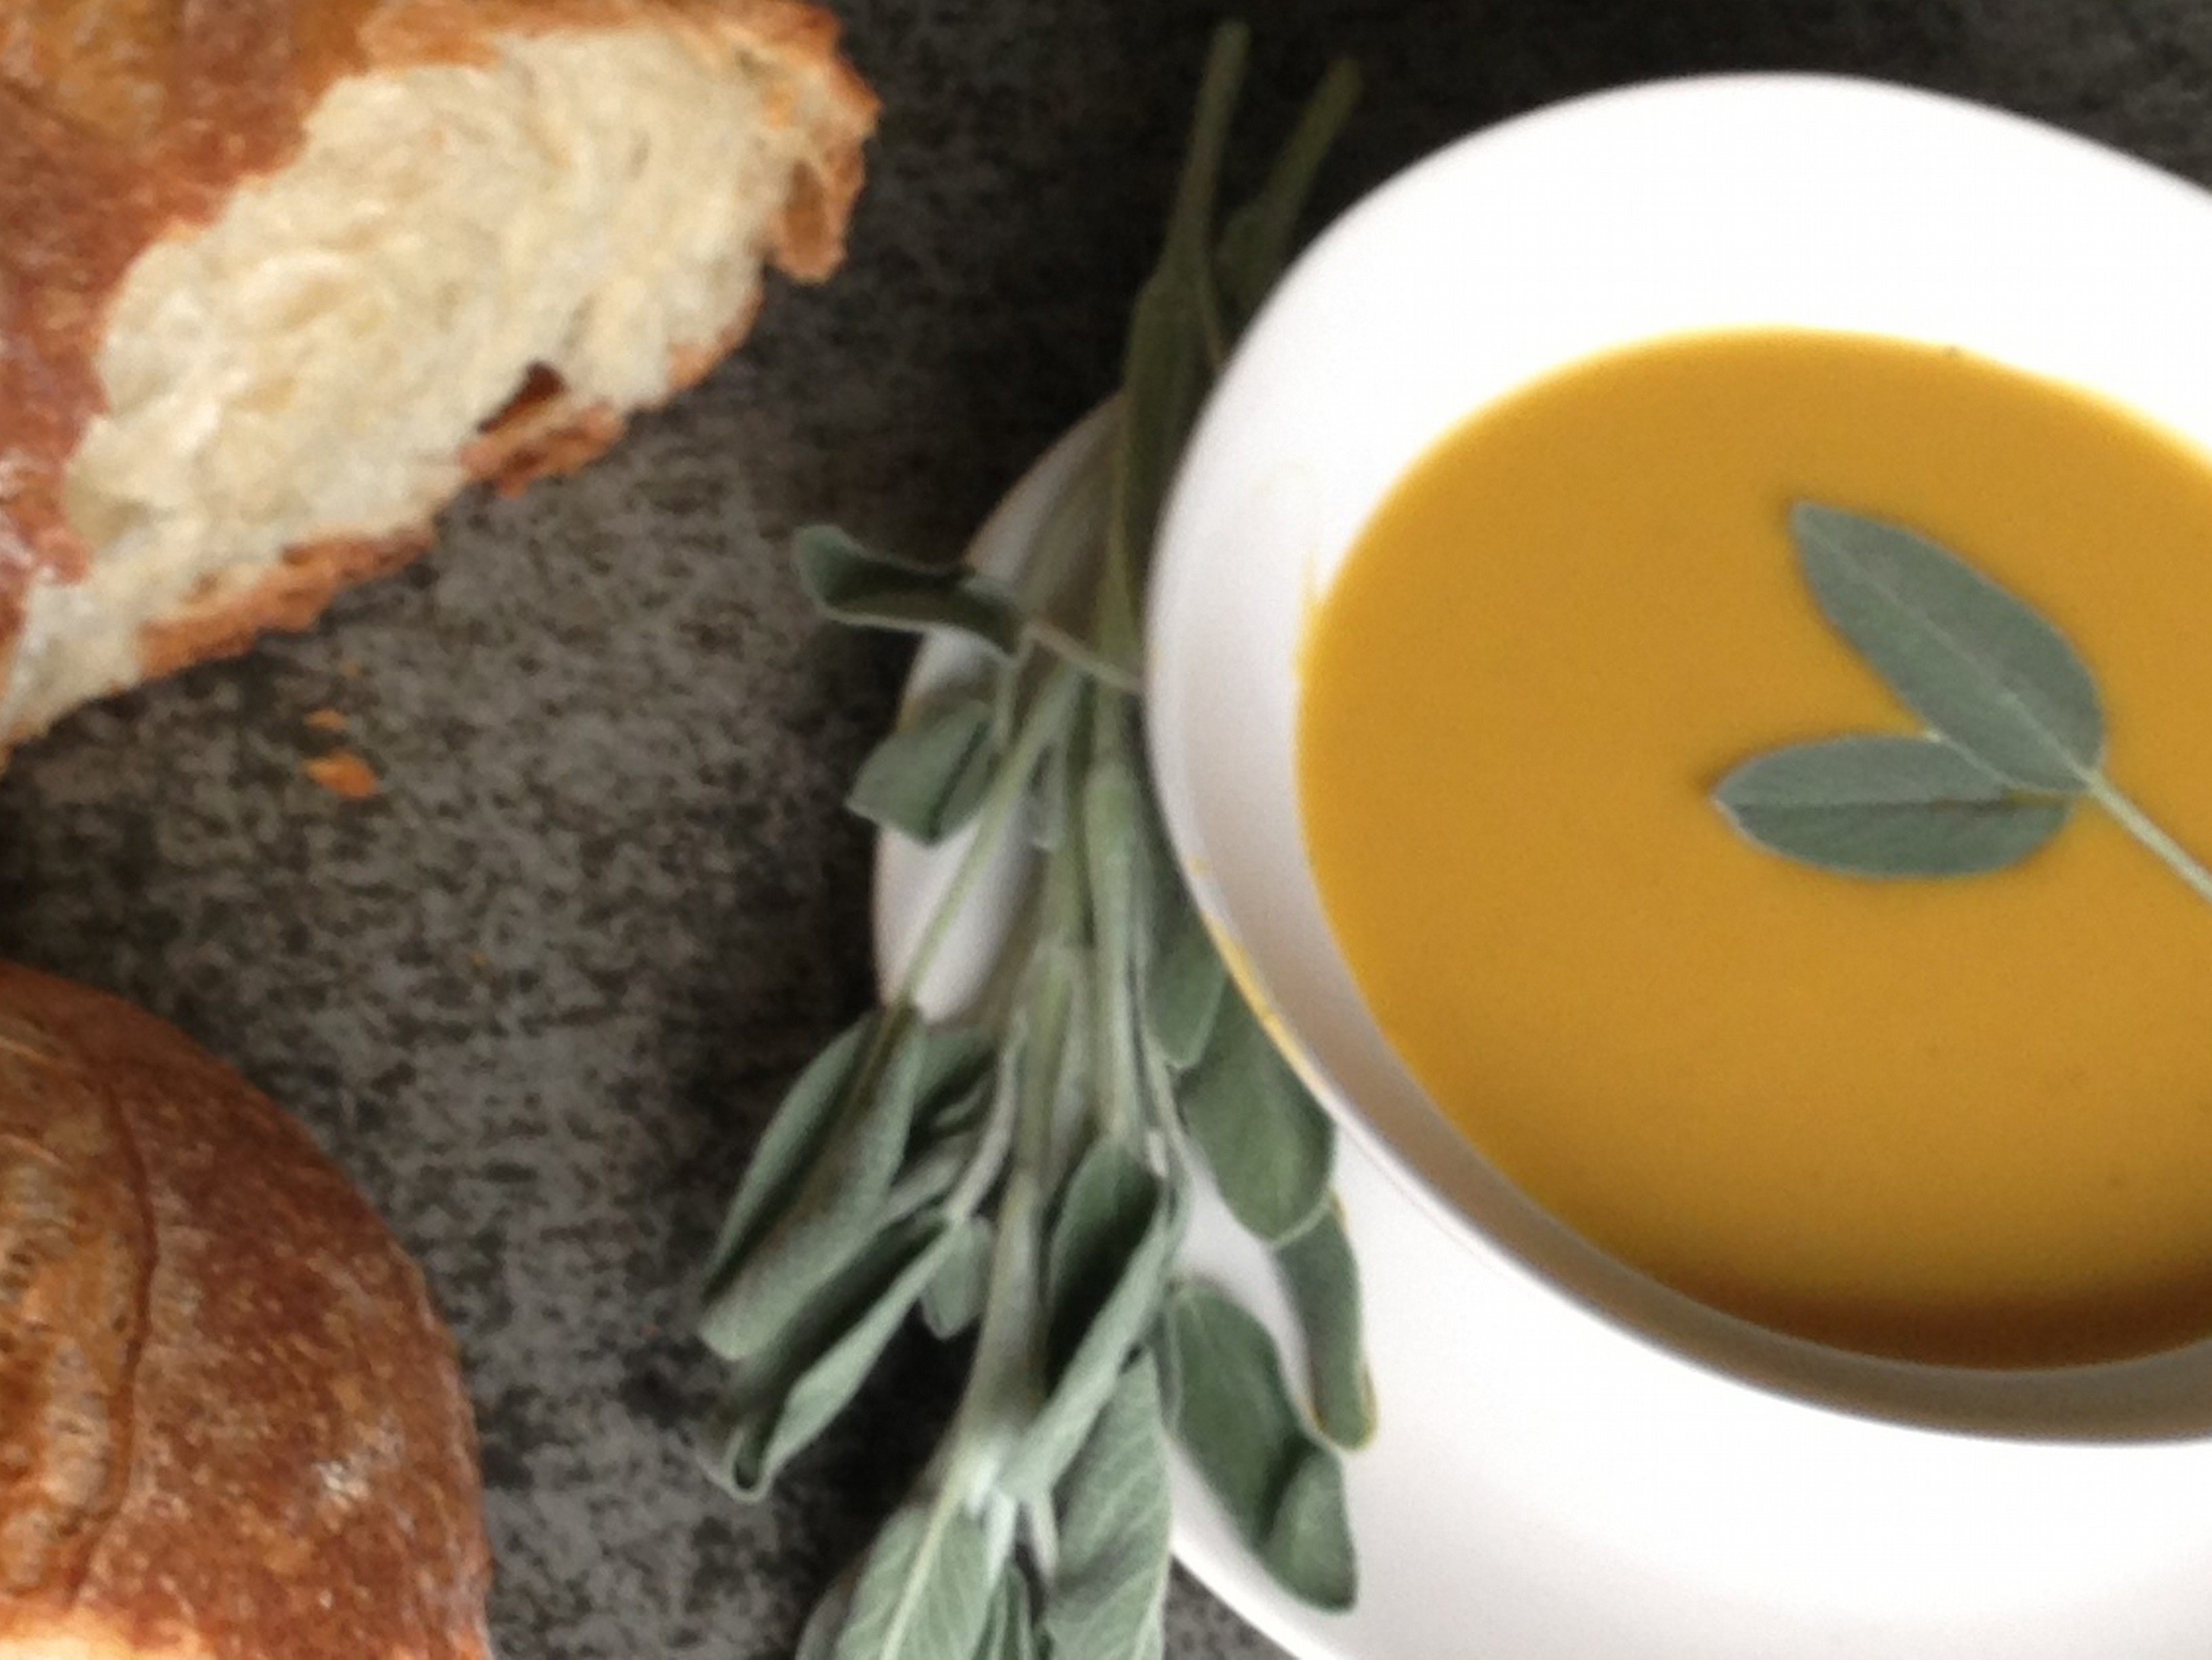 Anotrher one of Juan's great fresh soups; vegetarian baked butternut squash & sage soup with LePanier fresh baked baguette on the side